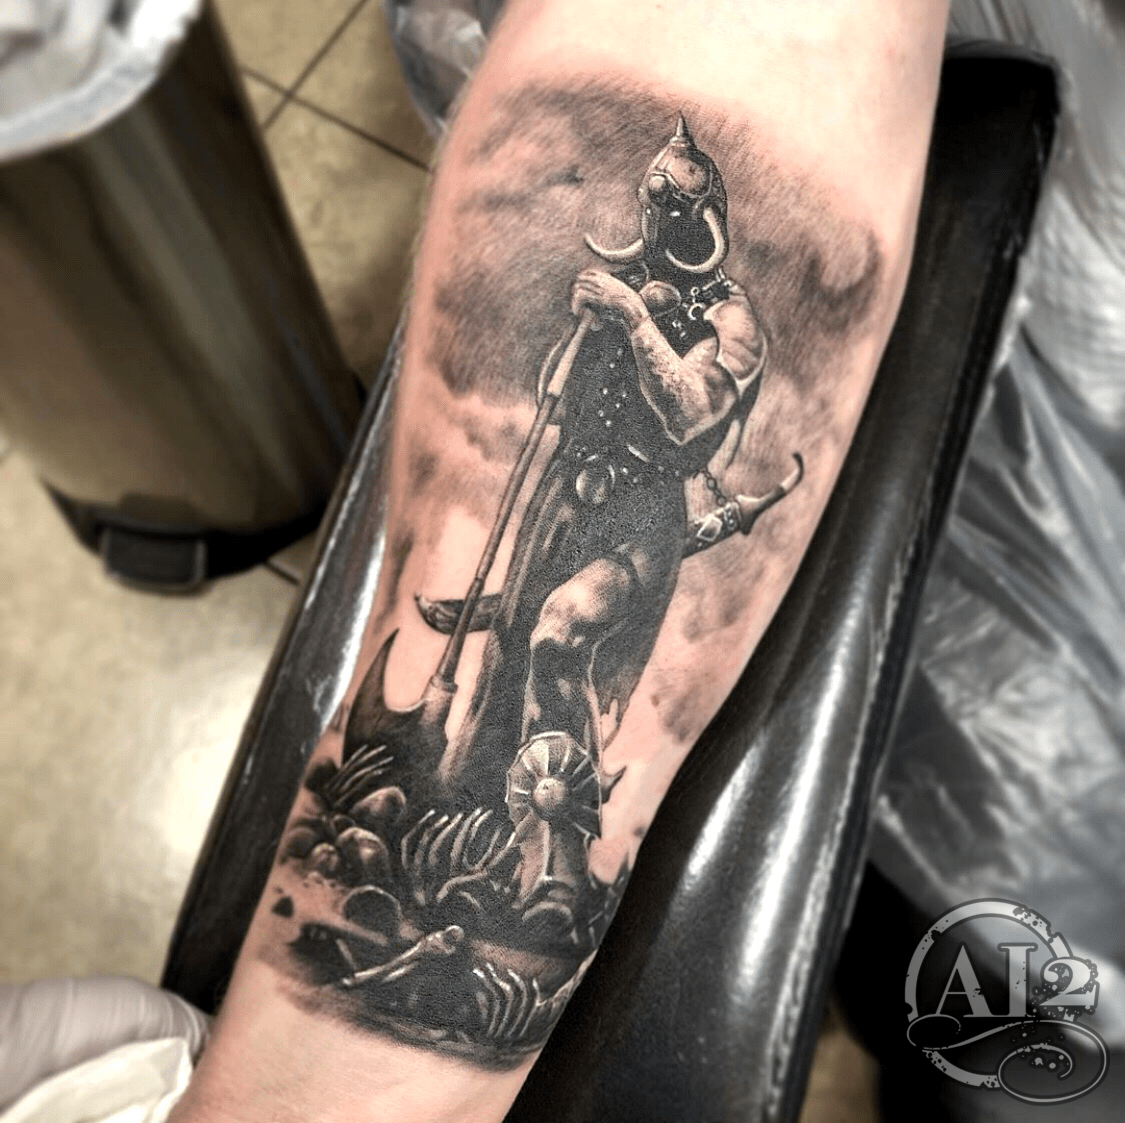 Hand poked knight tattoo on the inner forearm.